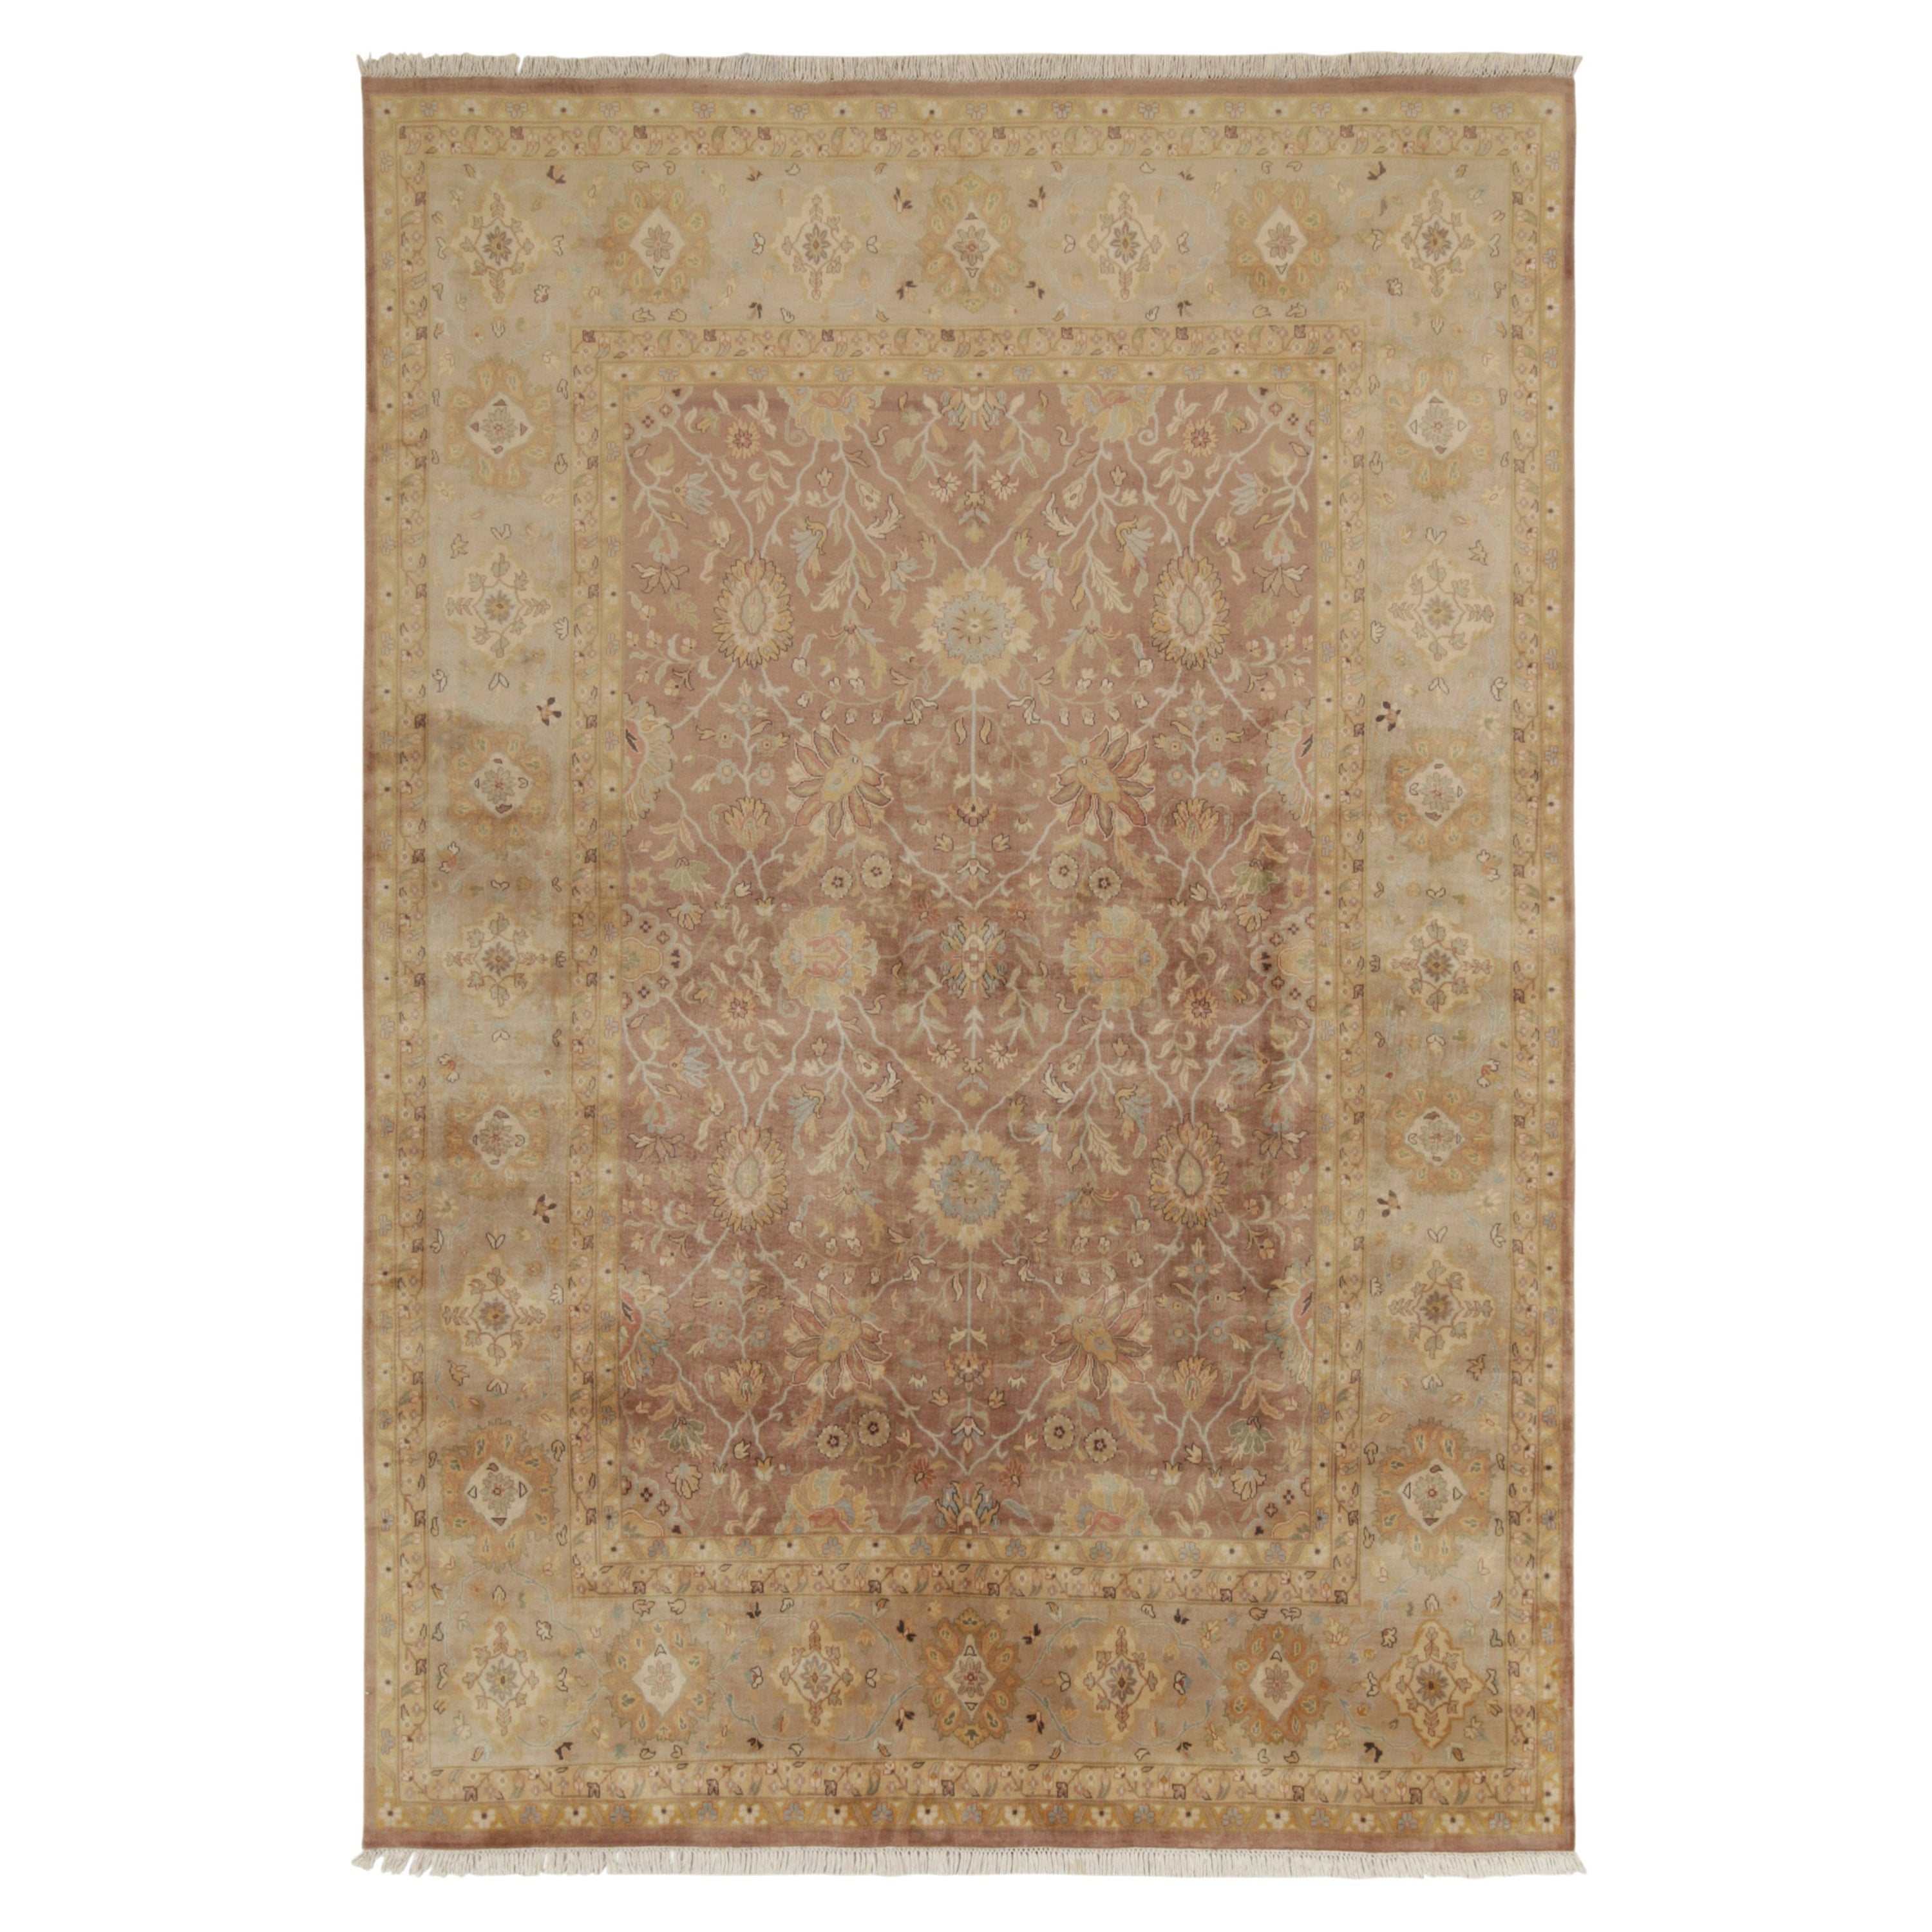 Rug & Kilim’s Tabriz Style Rug in Brown with Gold & Blue Floral Patterns For Sale